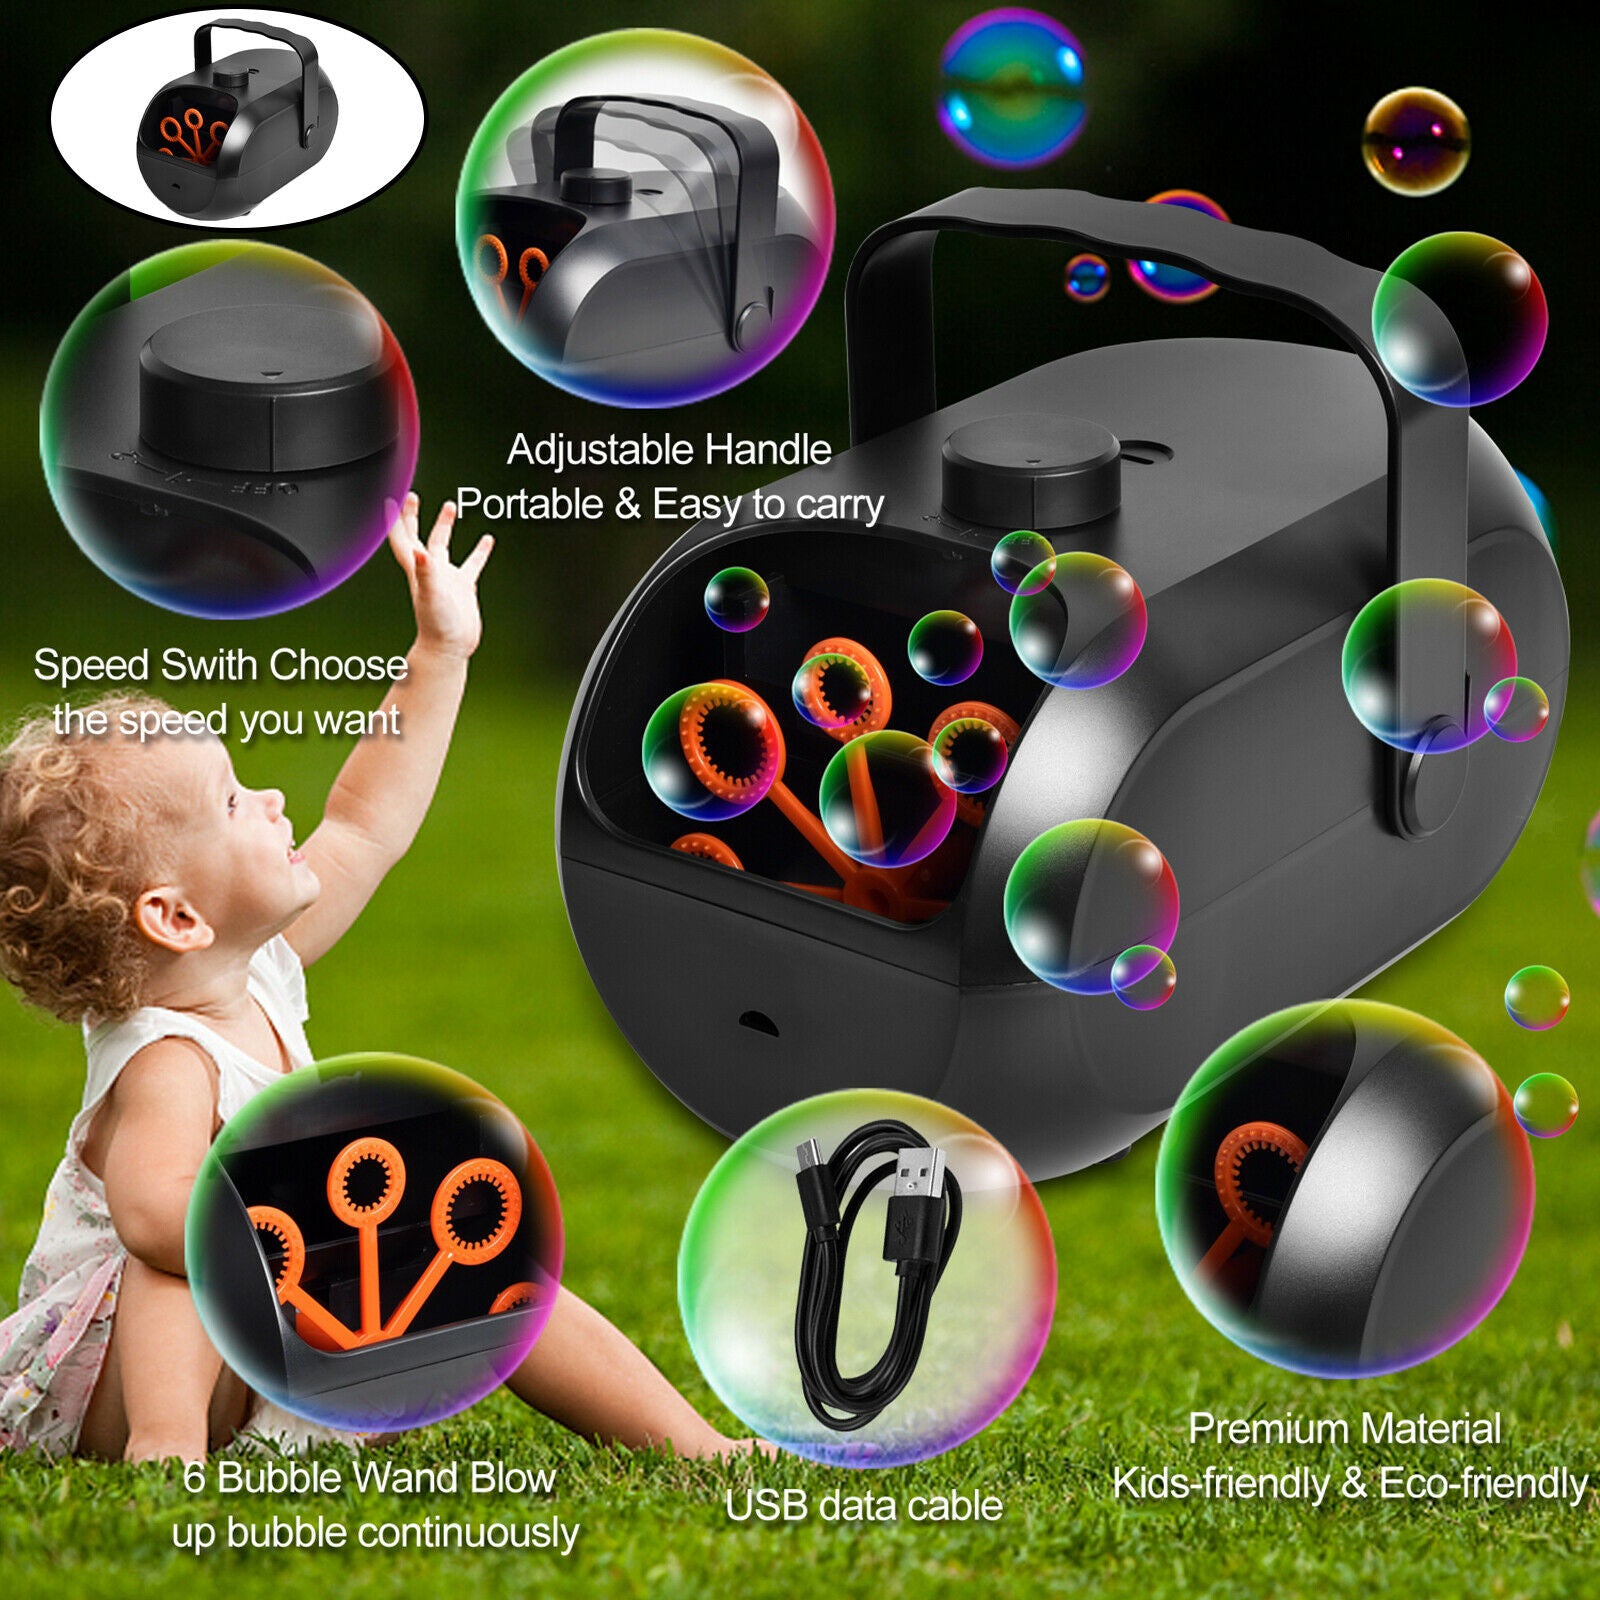 Bubble Machine Automatic Bubble Maker for Party Wedding USB Charging